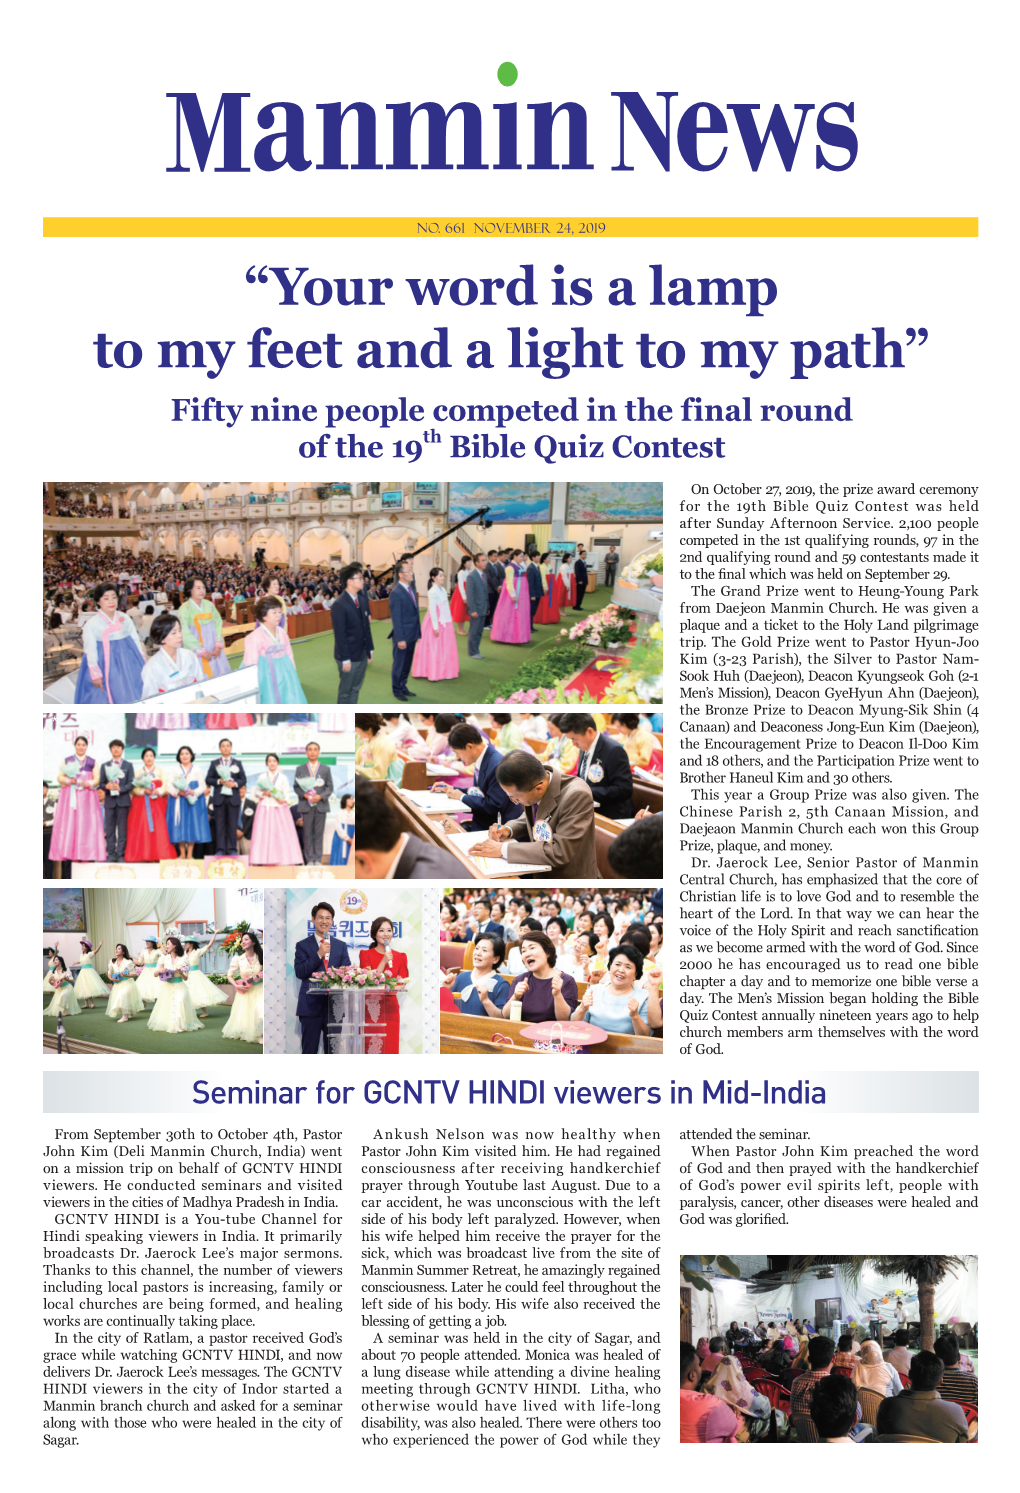 “Your Word Is a Lamp to My Feet and a Light to My Path” Fifty Nine People Competed in the Final Round of the 19Th Bible Quiz Contest